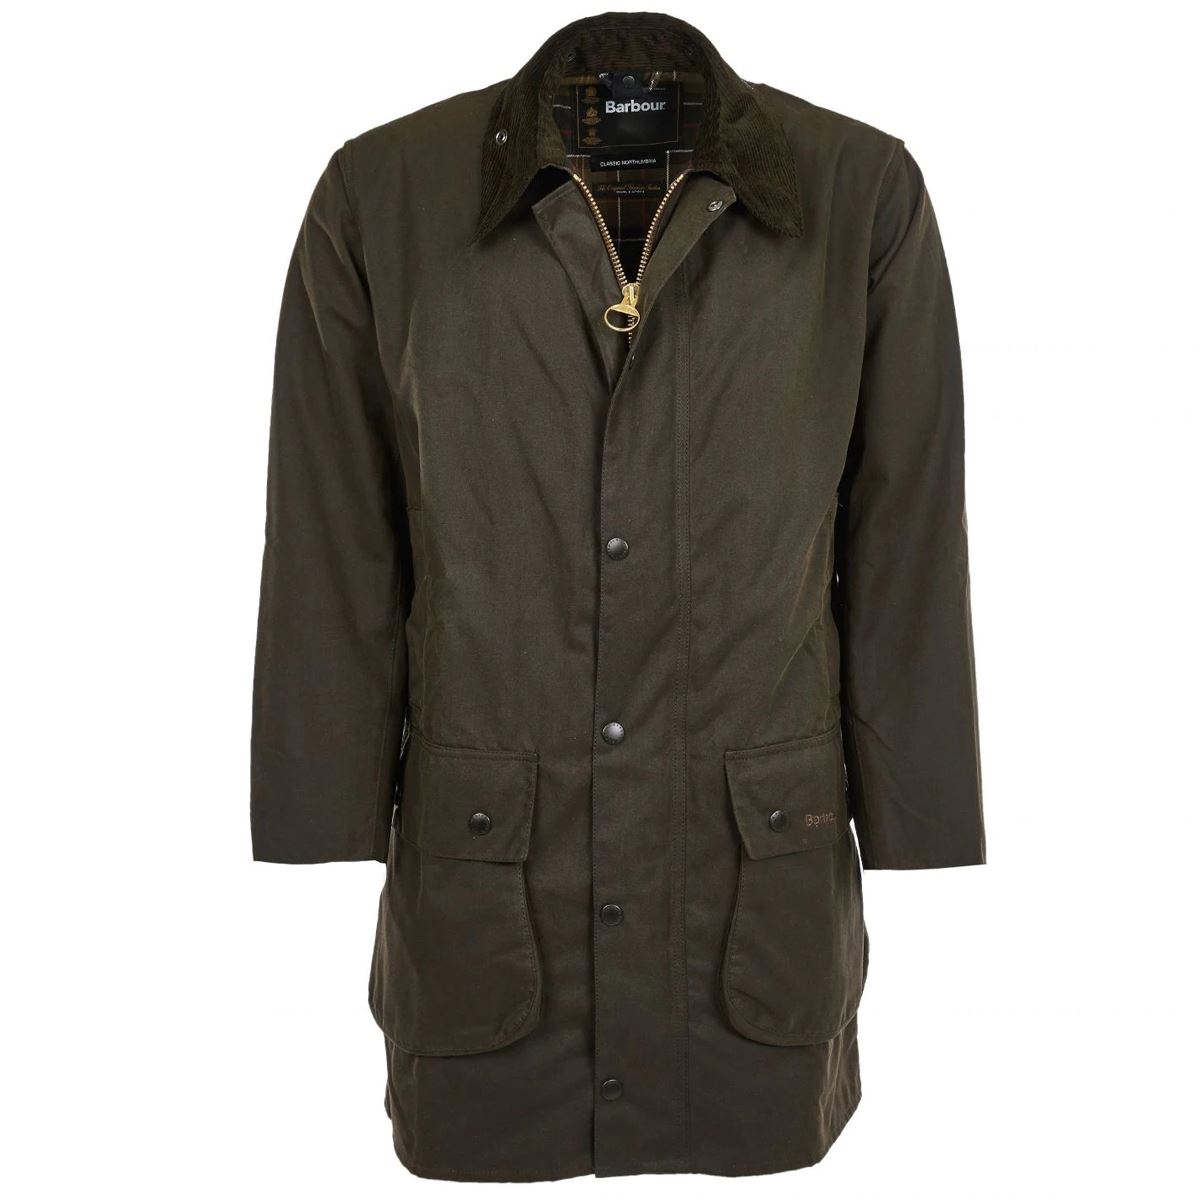 What fabric is used for the Barbour Northumbria Wax Jacket?